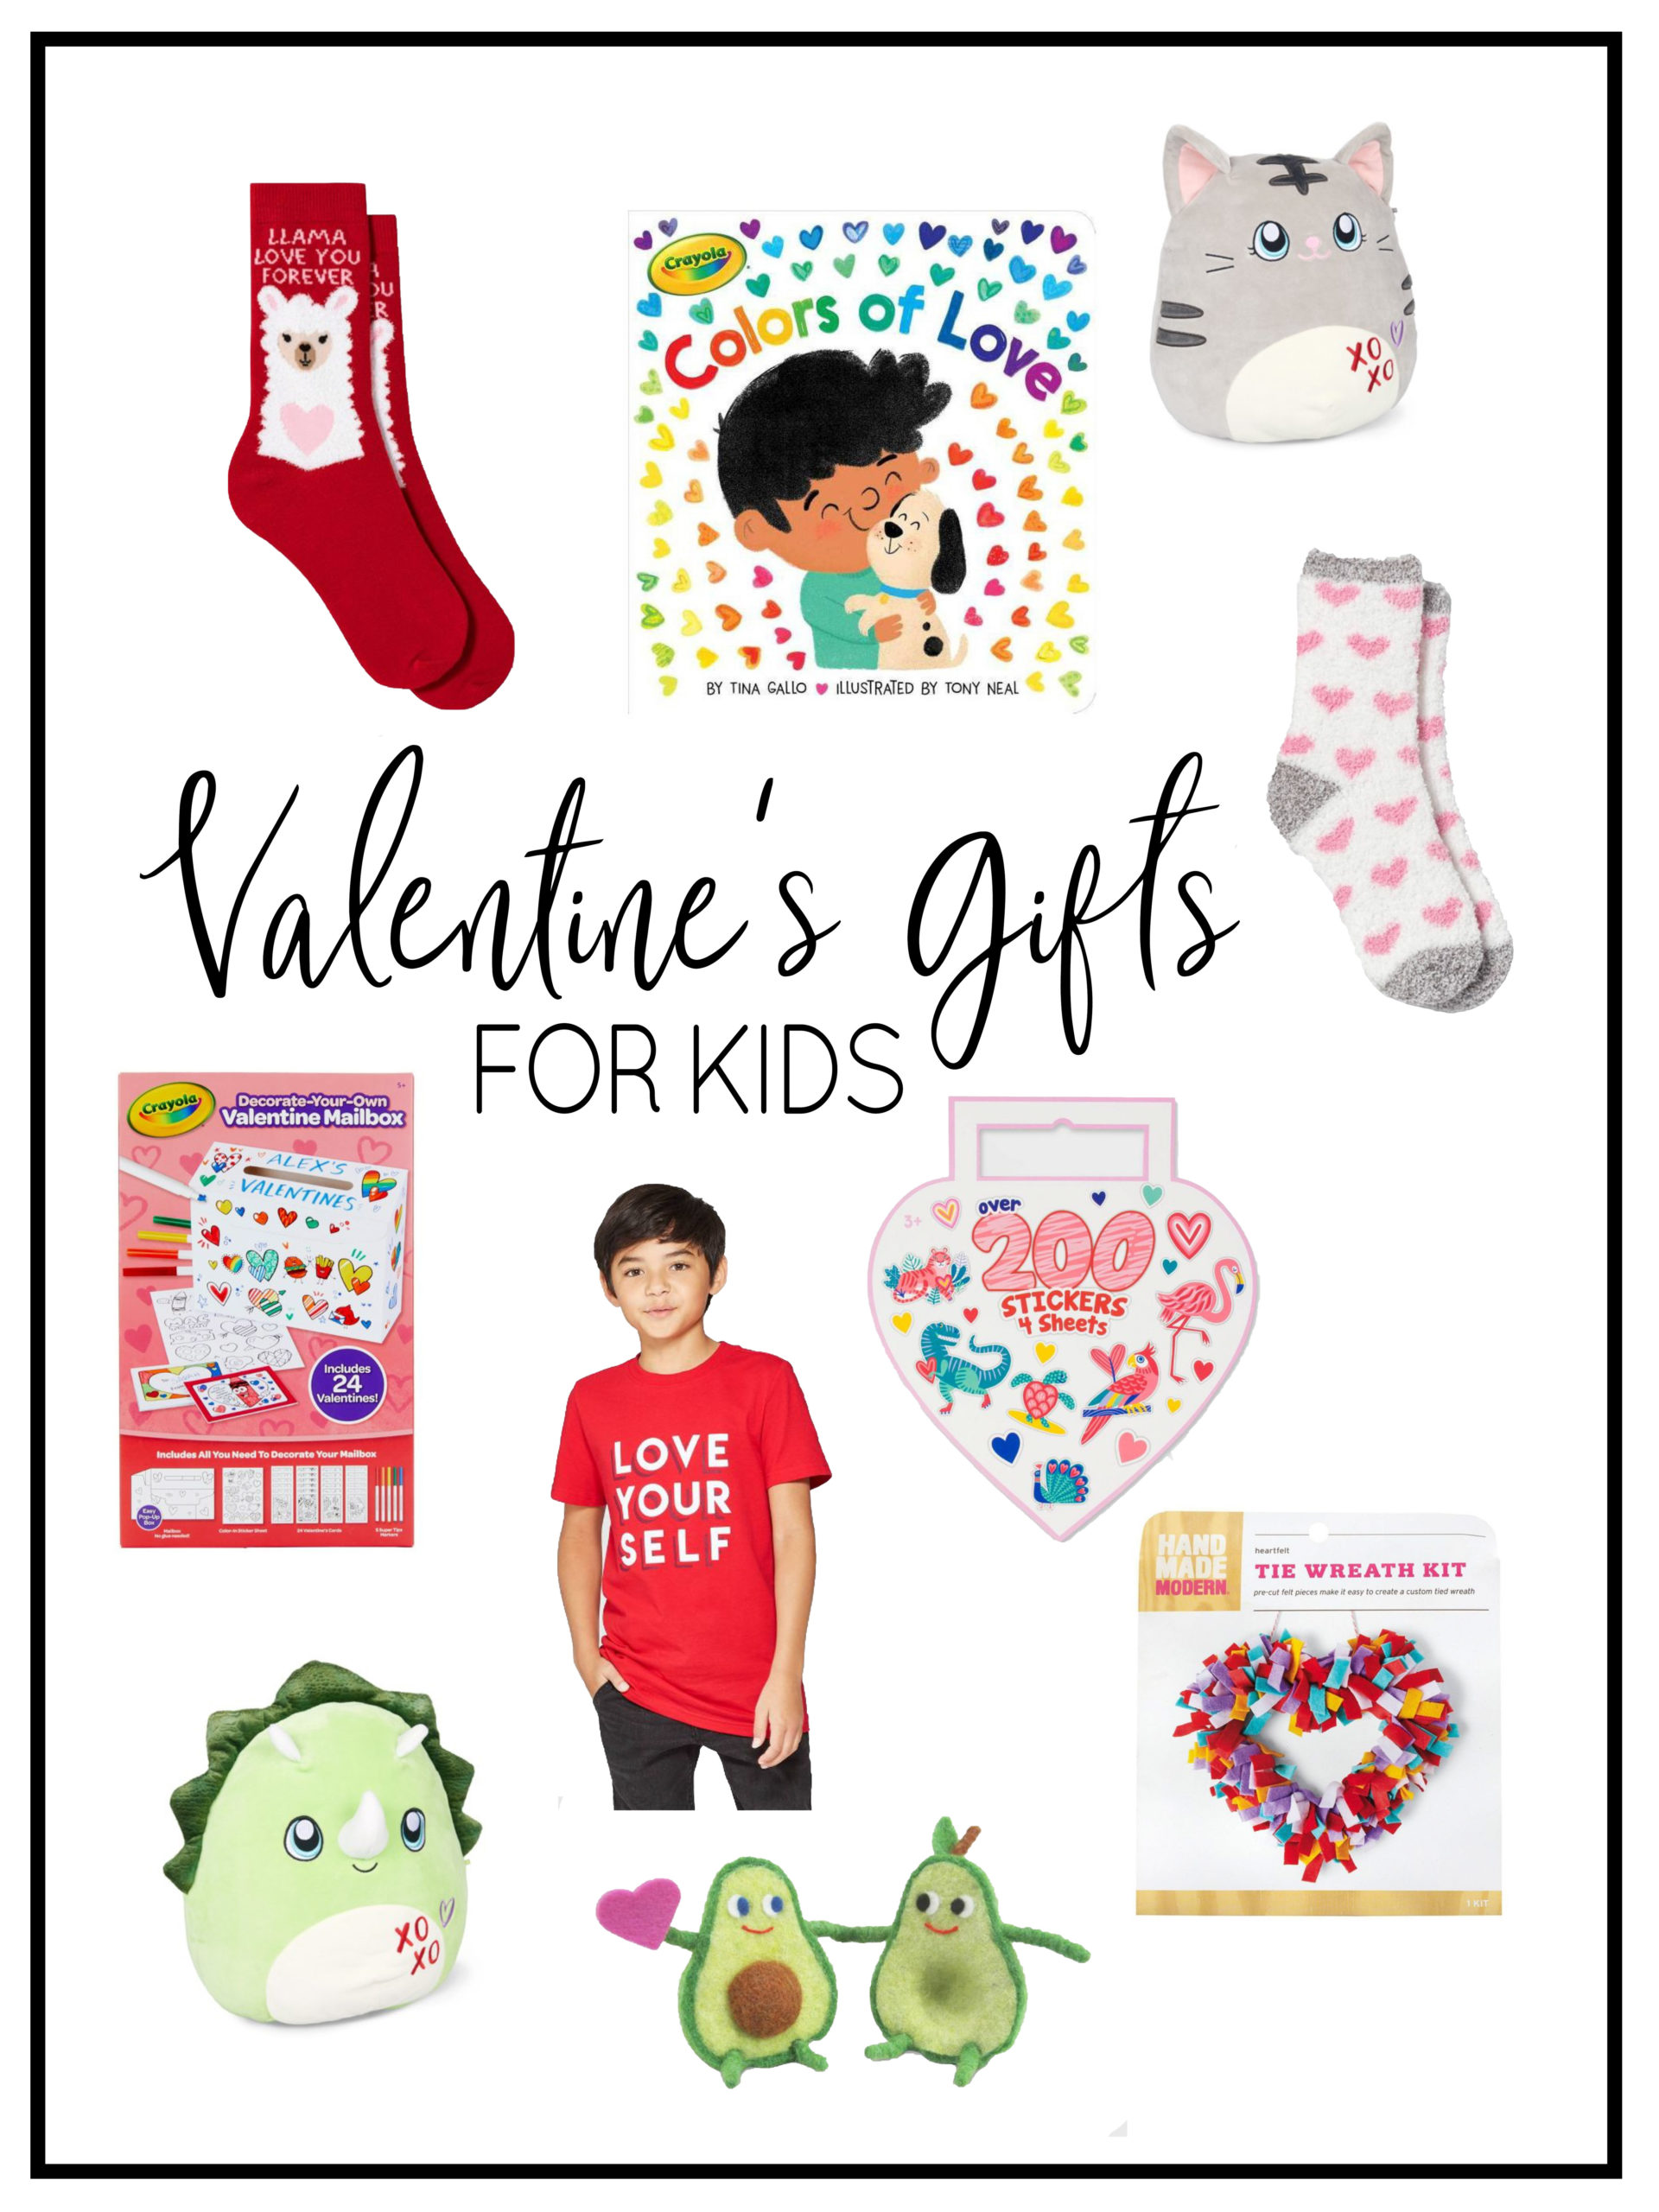 10 Non-Food Valentine's Day Gift Ideas for Kids! - Cotton Stem